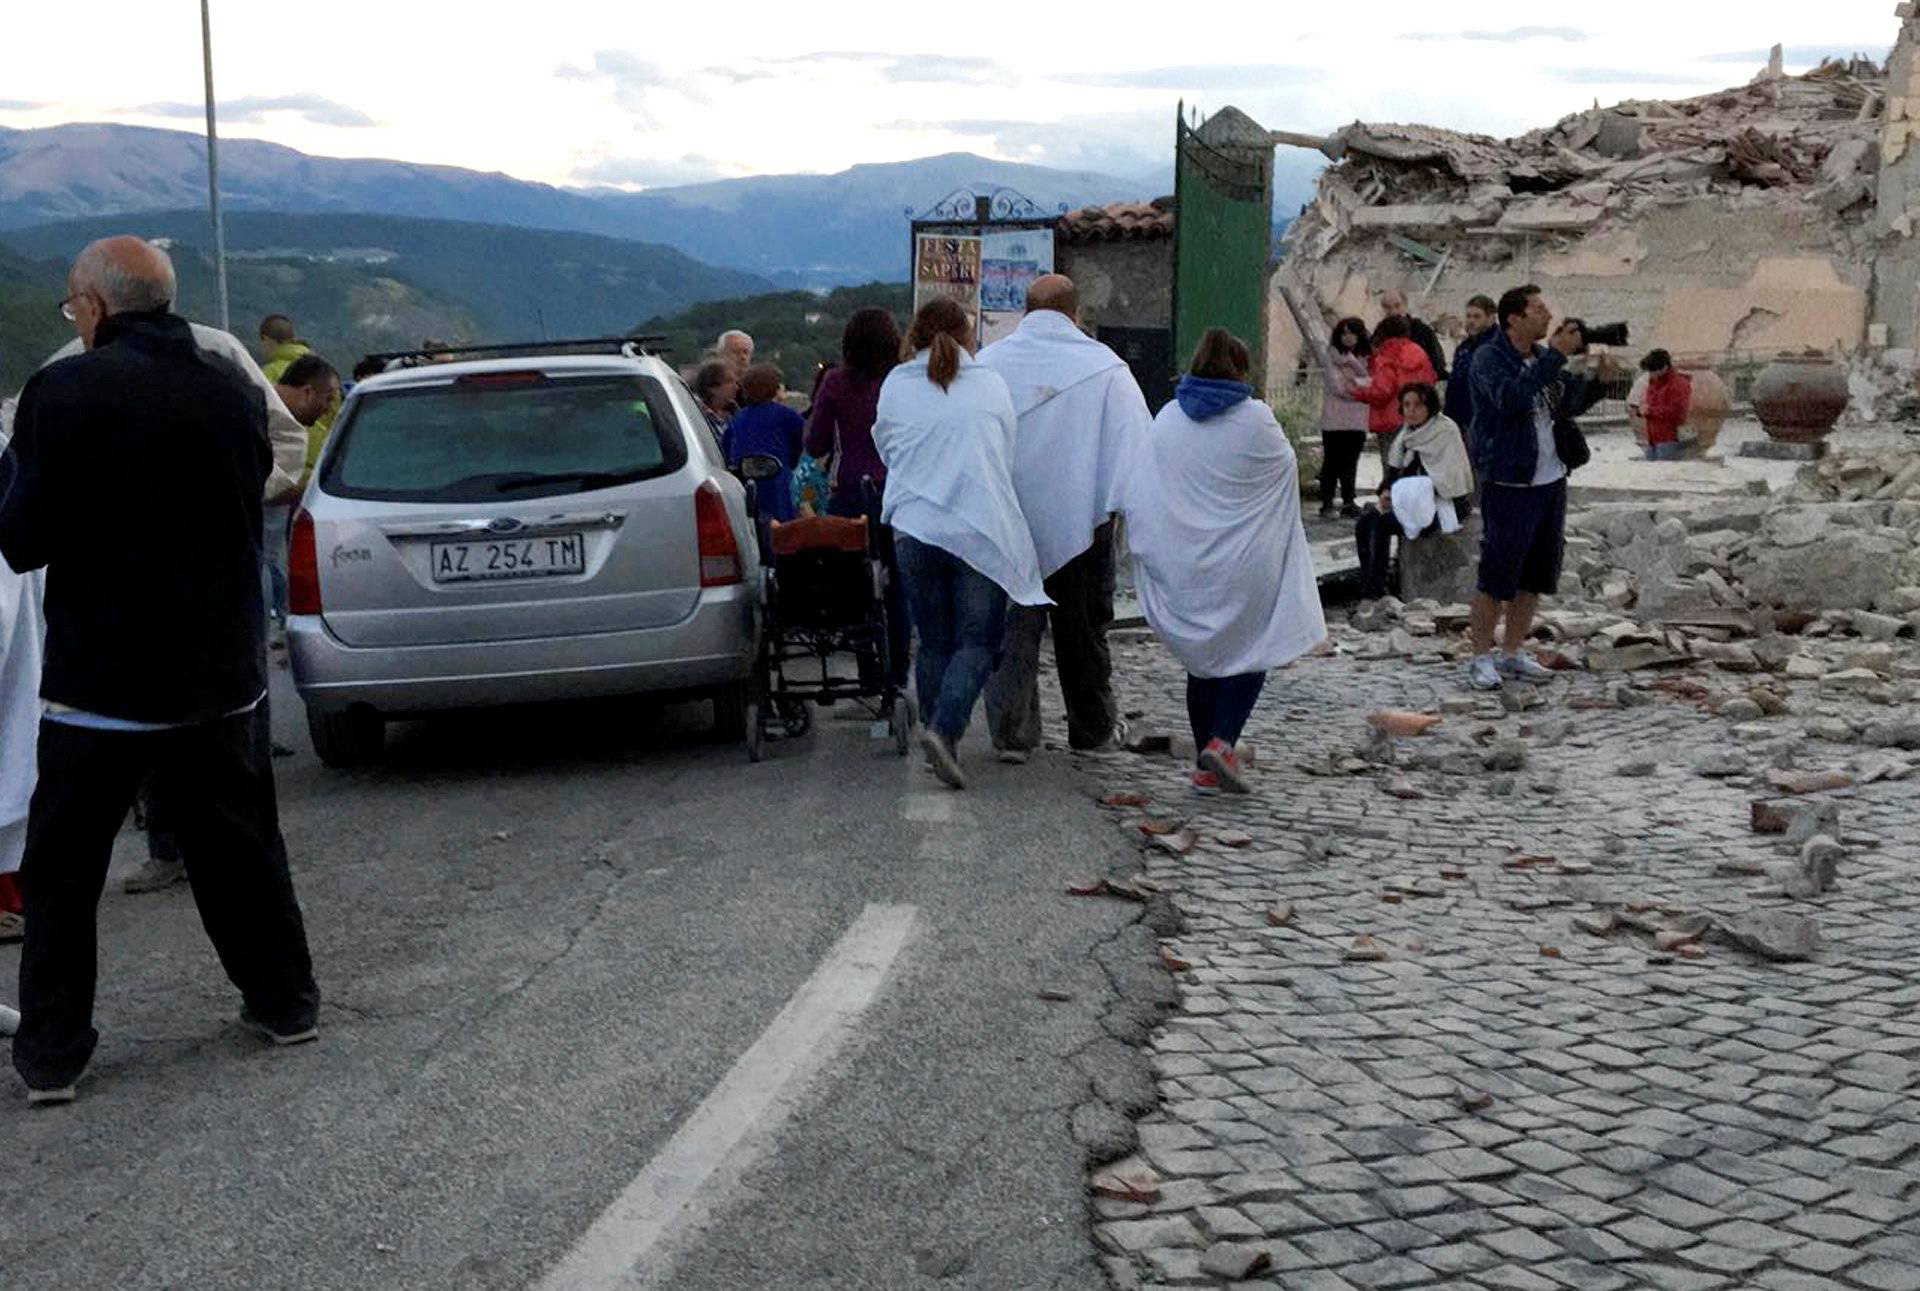 People stand along a road following a quake in Amatrice 